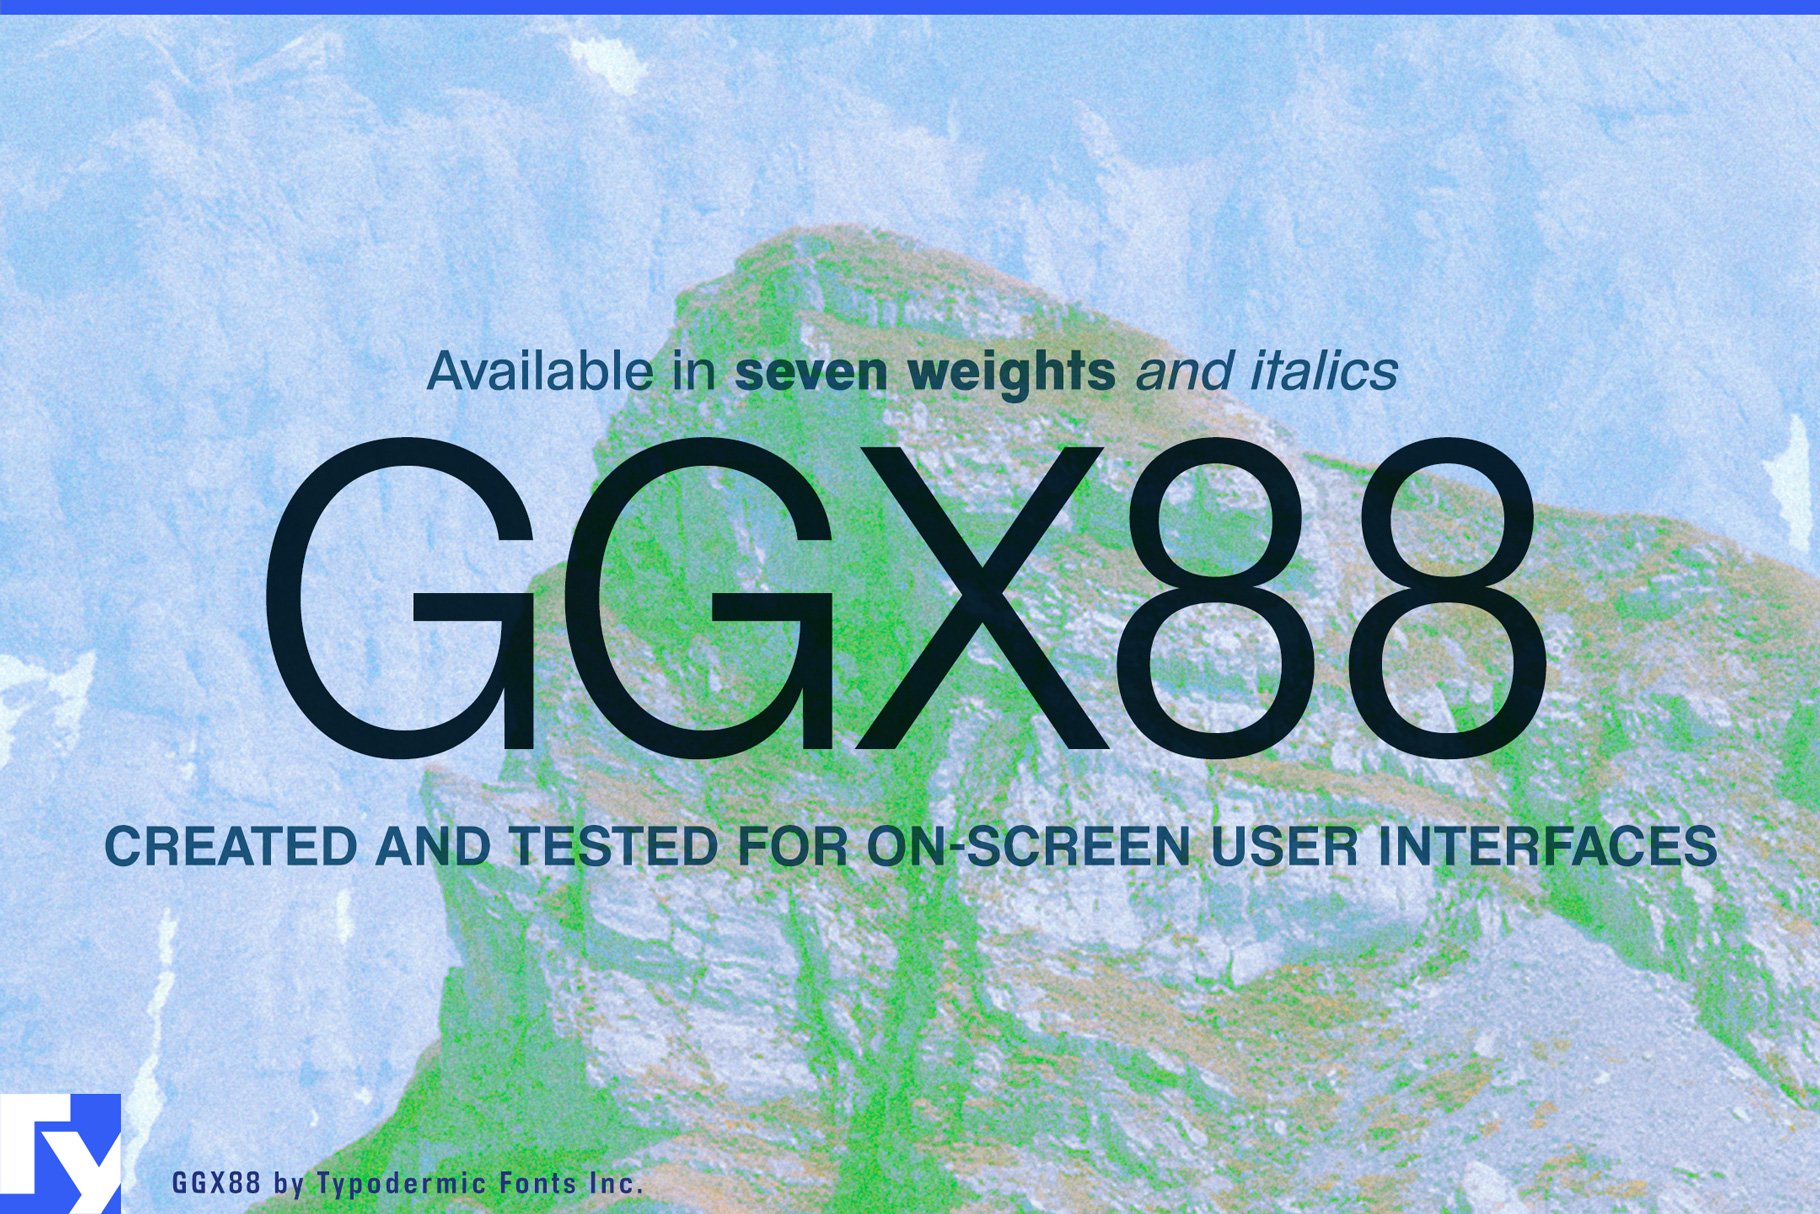 GGX88 cover image.